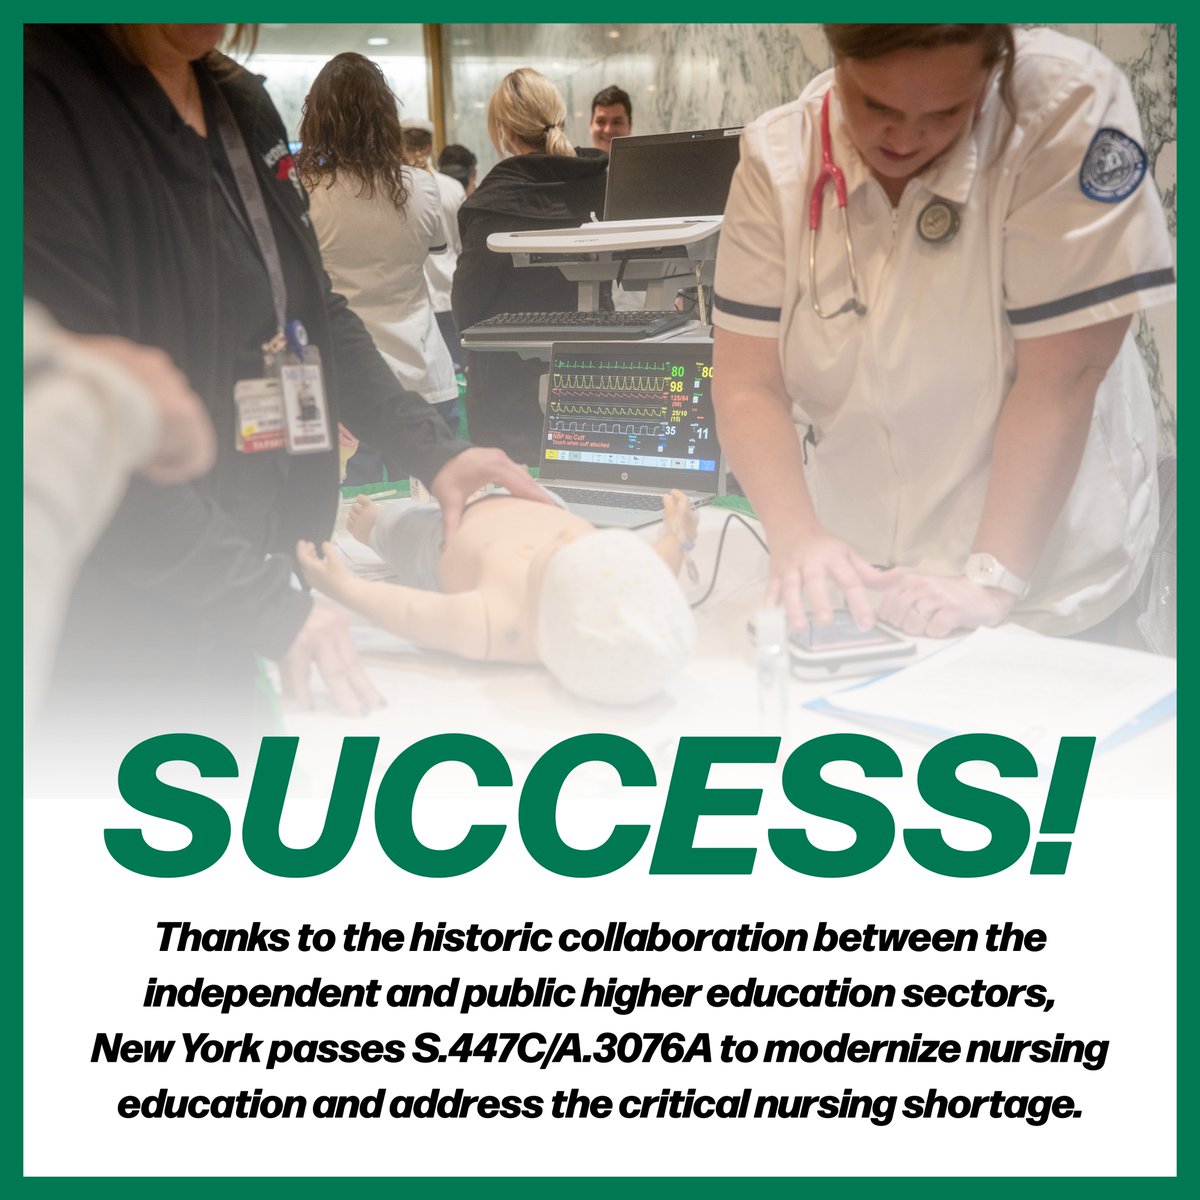 On Monday, the NYS Legislature passed legislation to help address the shortage of 40,000 nurses New York State is expected to face by 2030. CICU, @SUNY & @CUNY worked closely together to help lead the way. #NYnursingprograms #nynurses #highereducation #leadingtheway